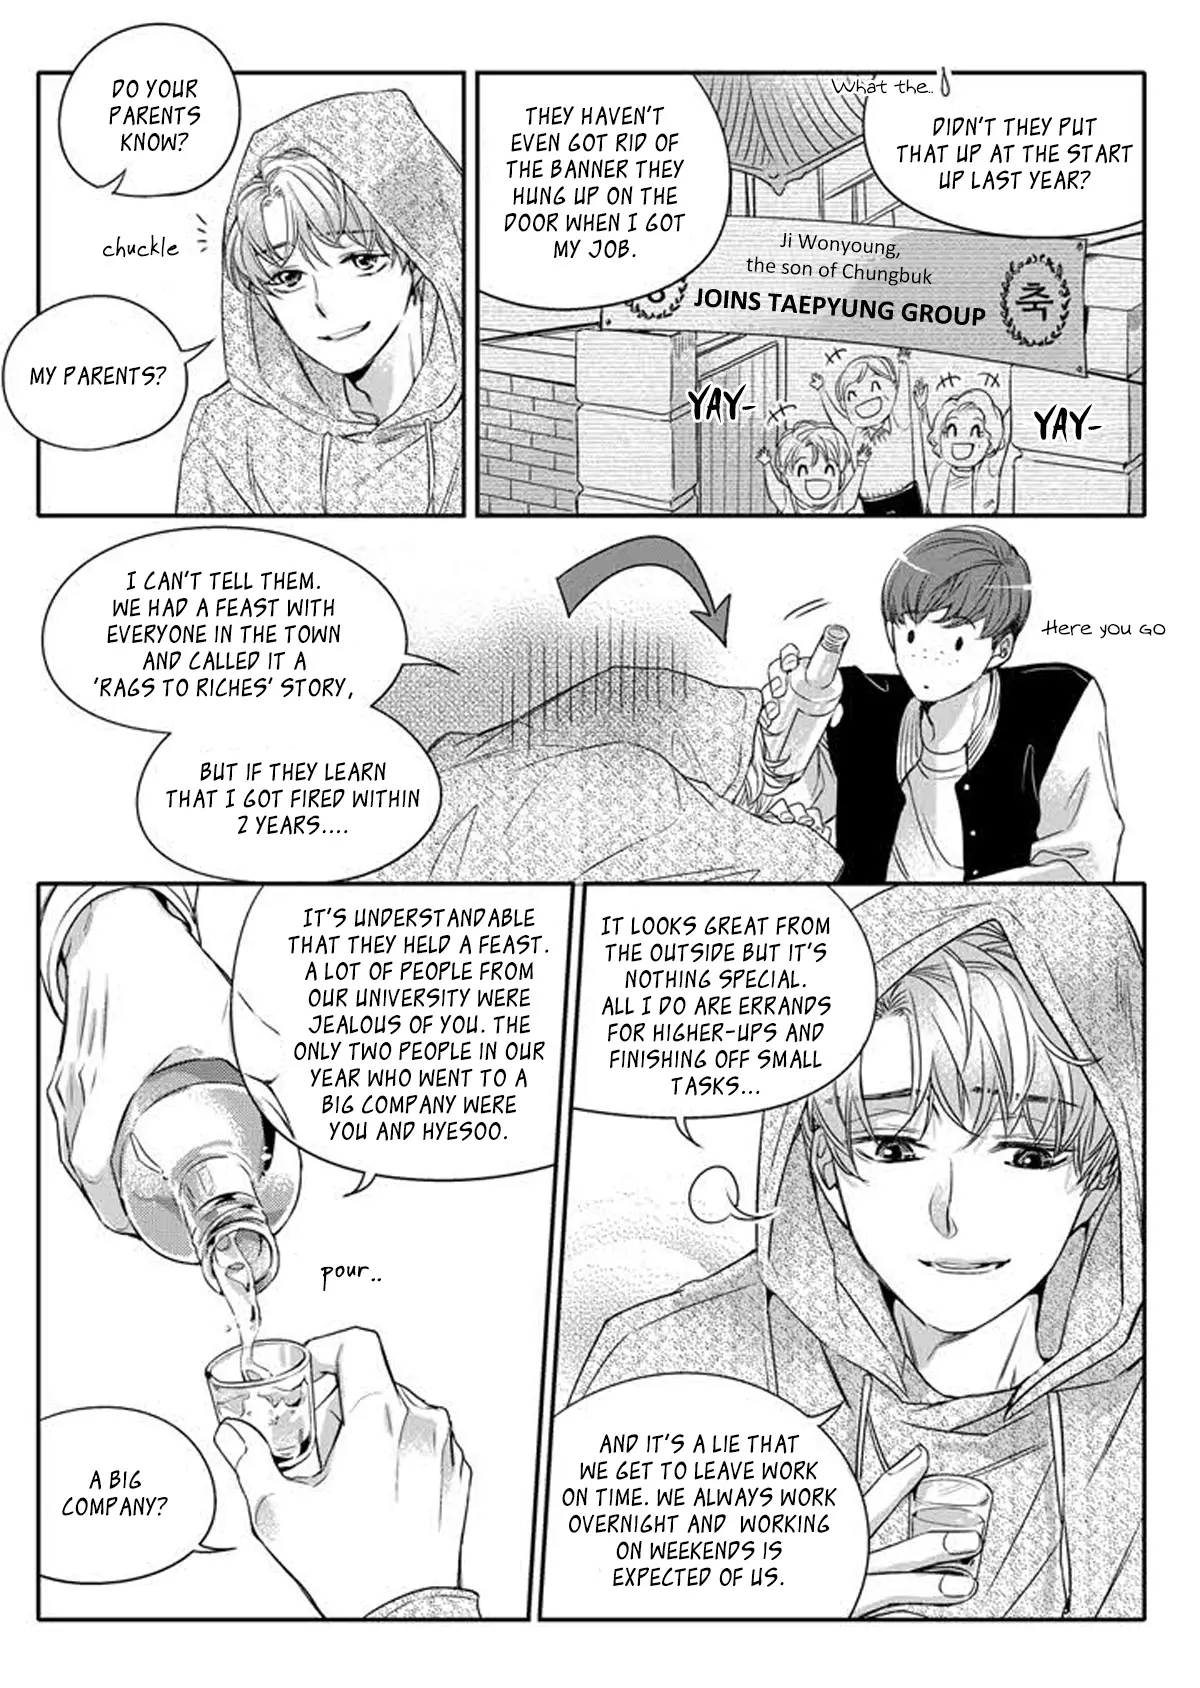 Unintentional Love Story - 1 page 8